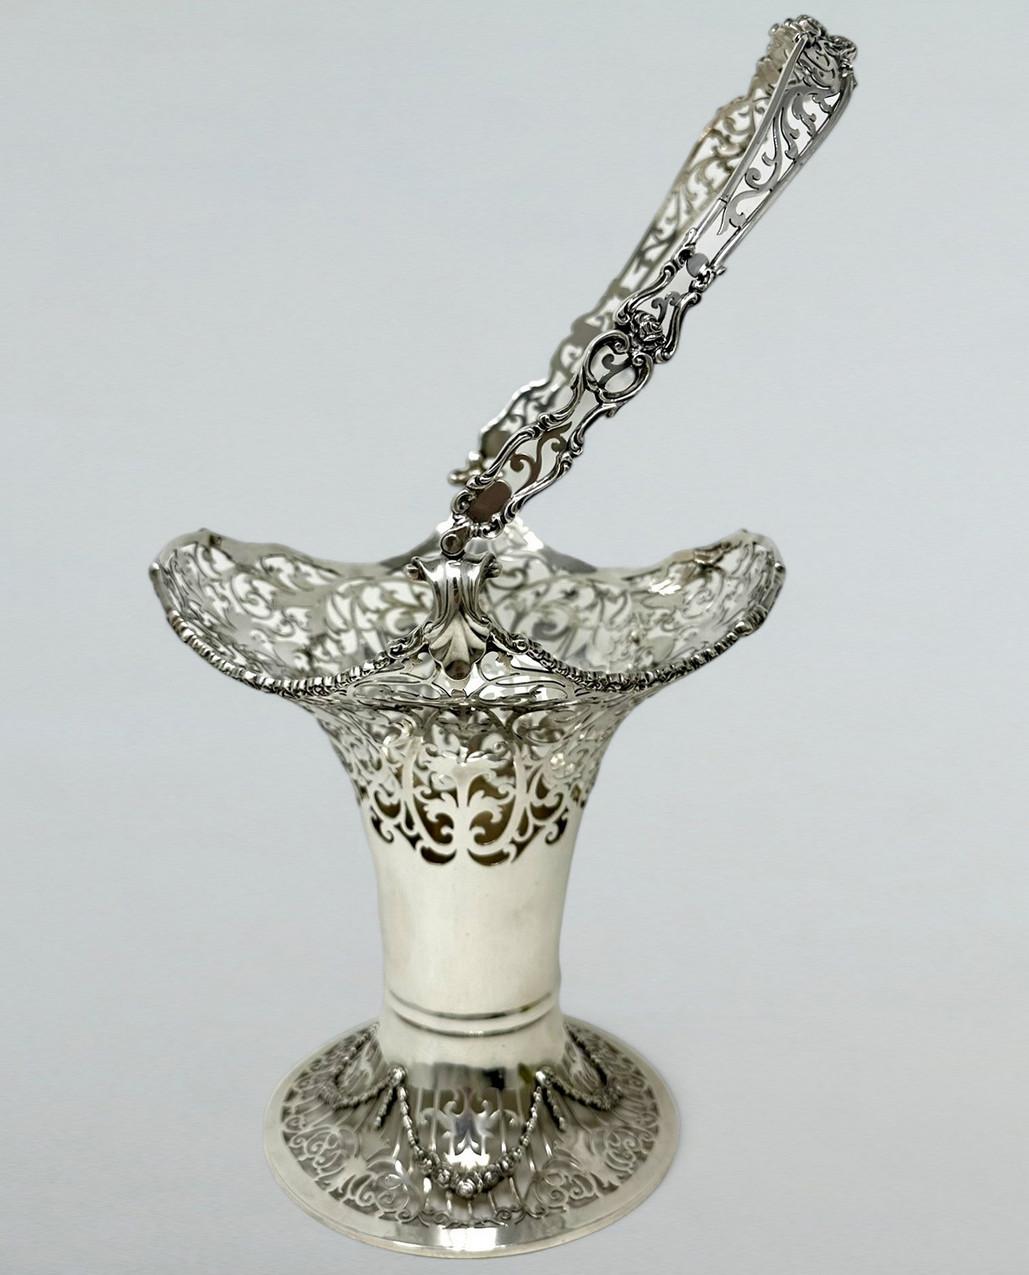 Superb Edwardian Heavy Gauge Silver Swing Handle Fruit Basket or Centerpiece of unusually large proportions and generous weight. 

The waisted form upper flaired body with lavish open fret work decoration, a central ring turned plain socle, ending